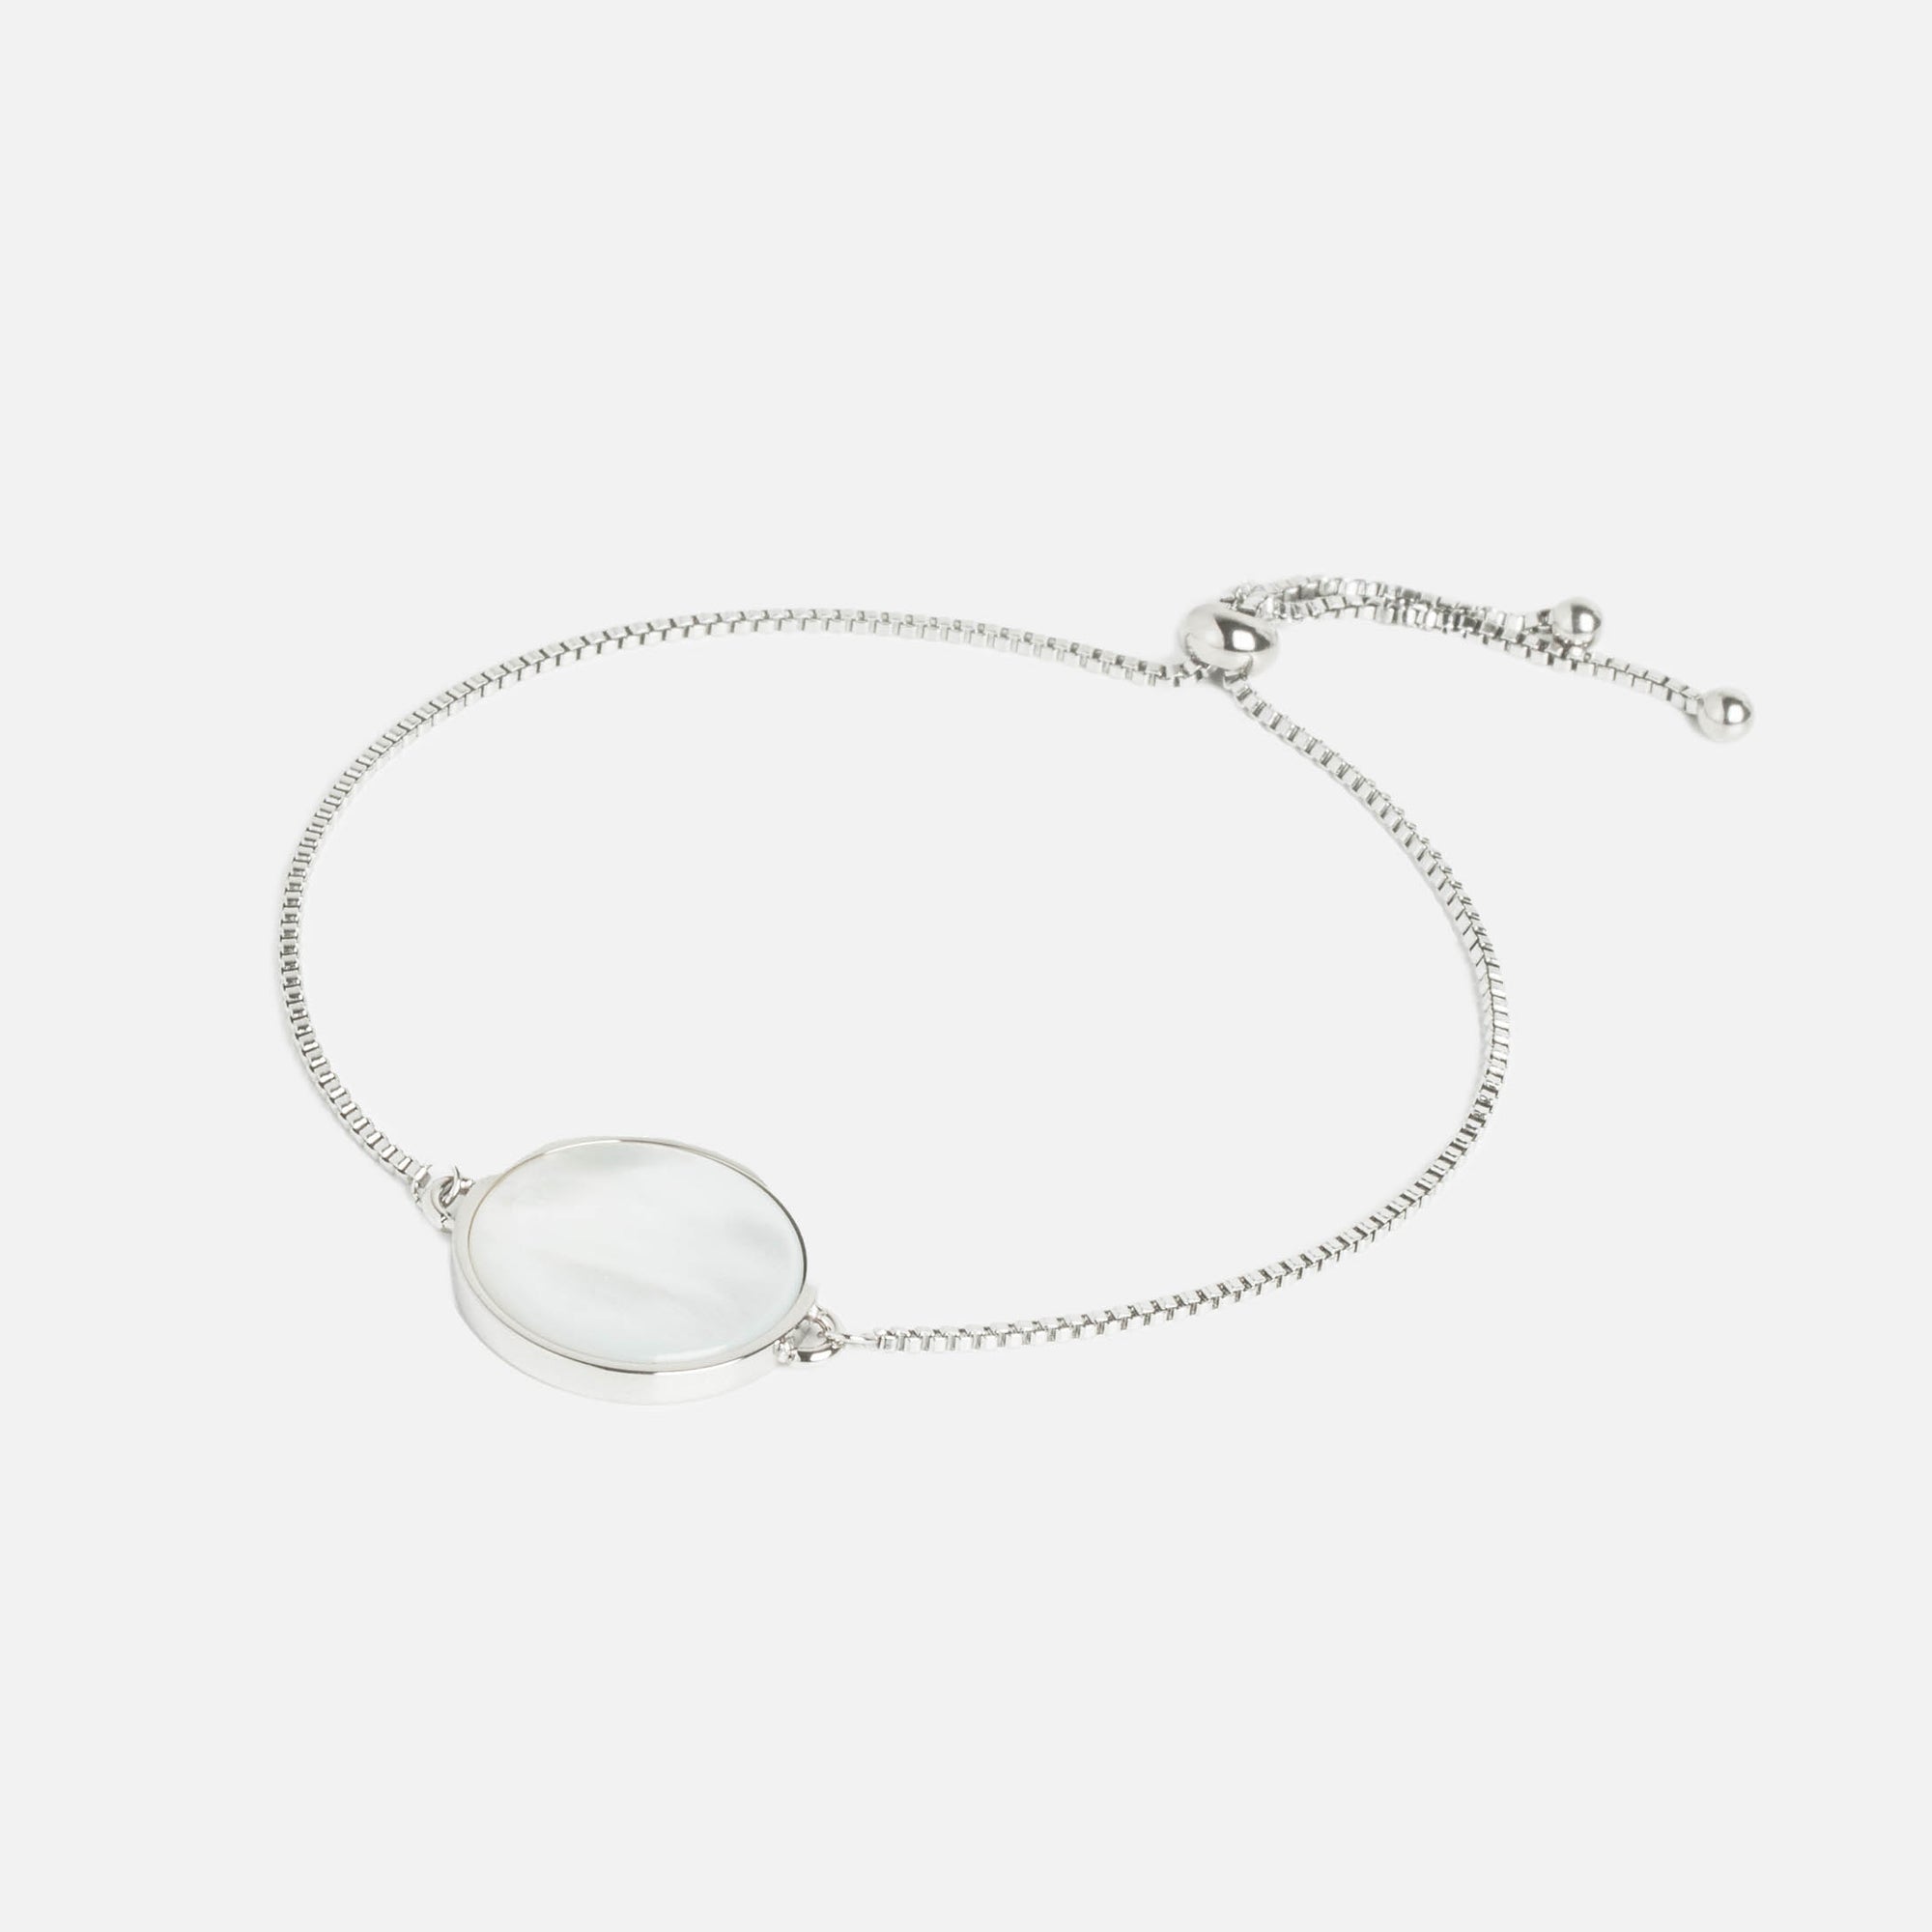 Silvered stainless steel bracelet with pearly circle